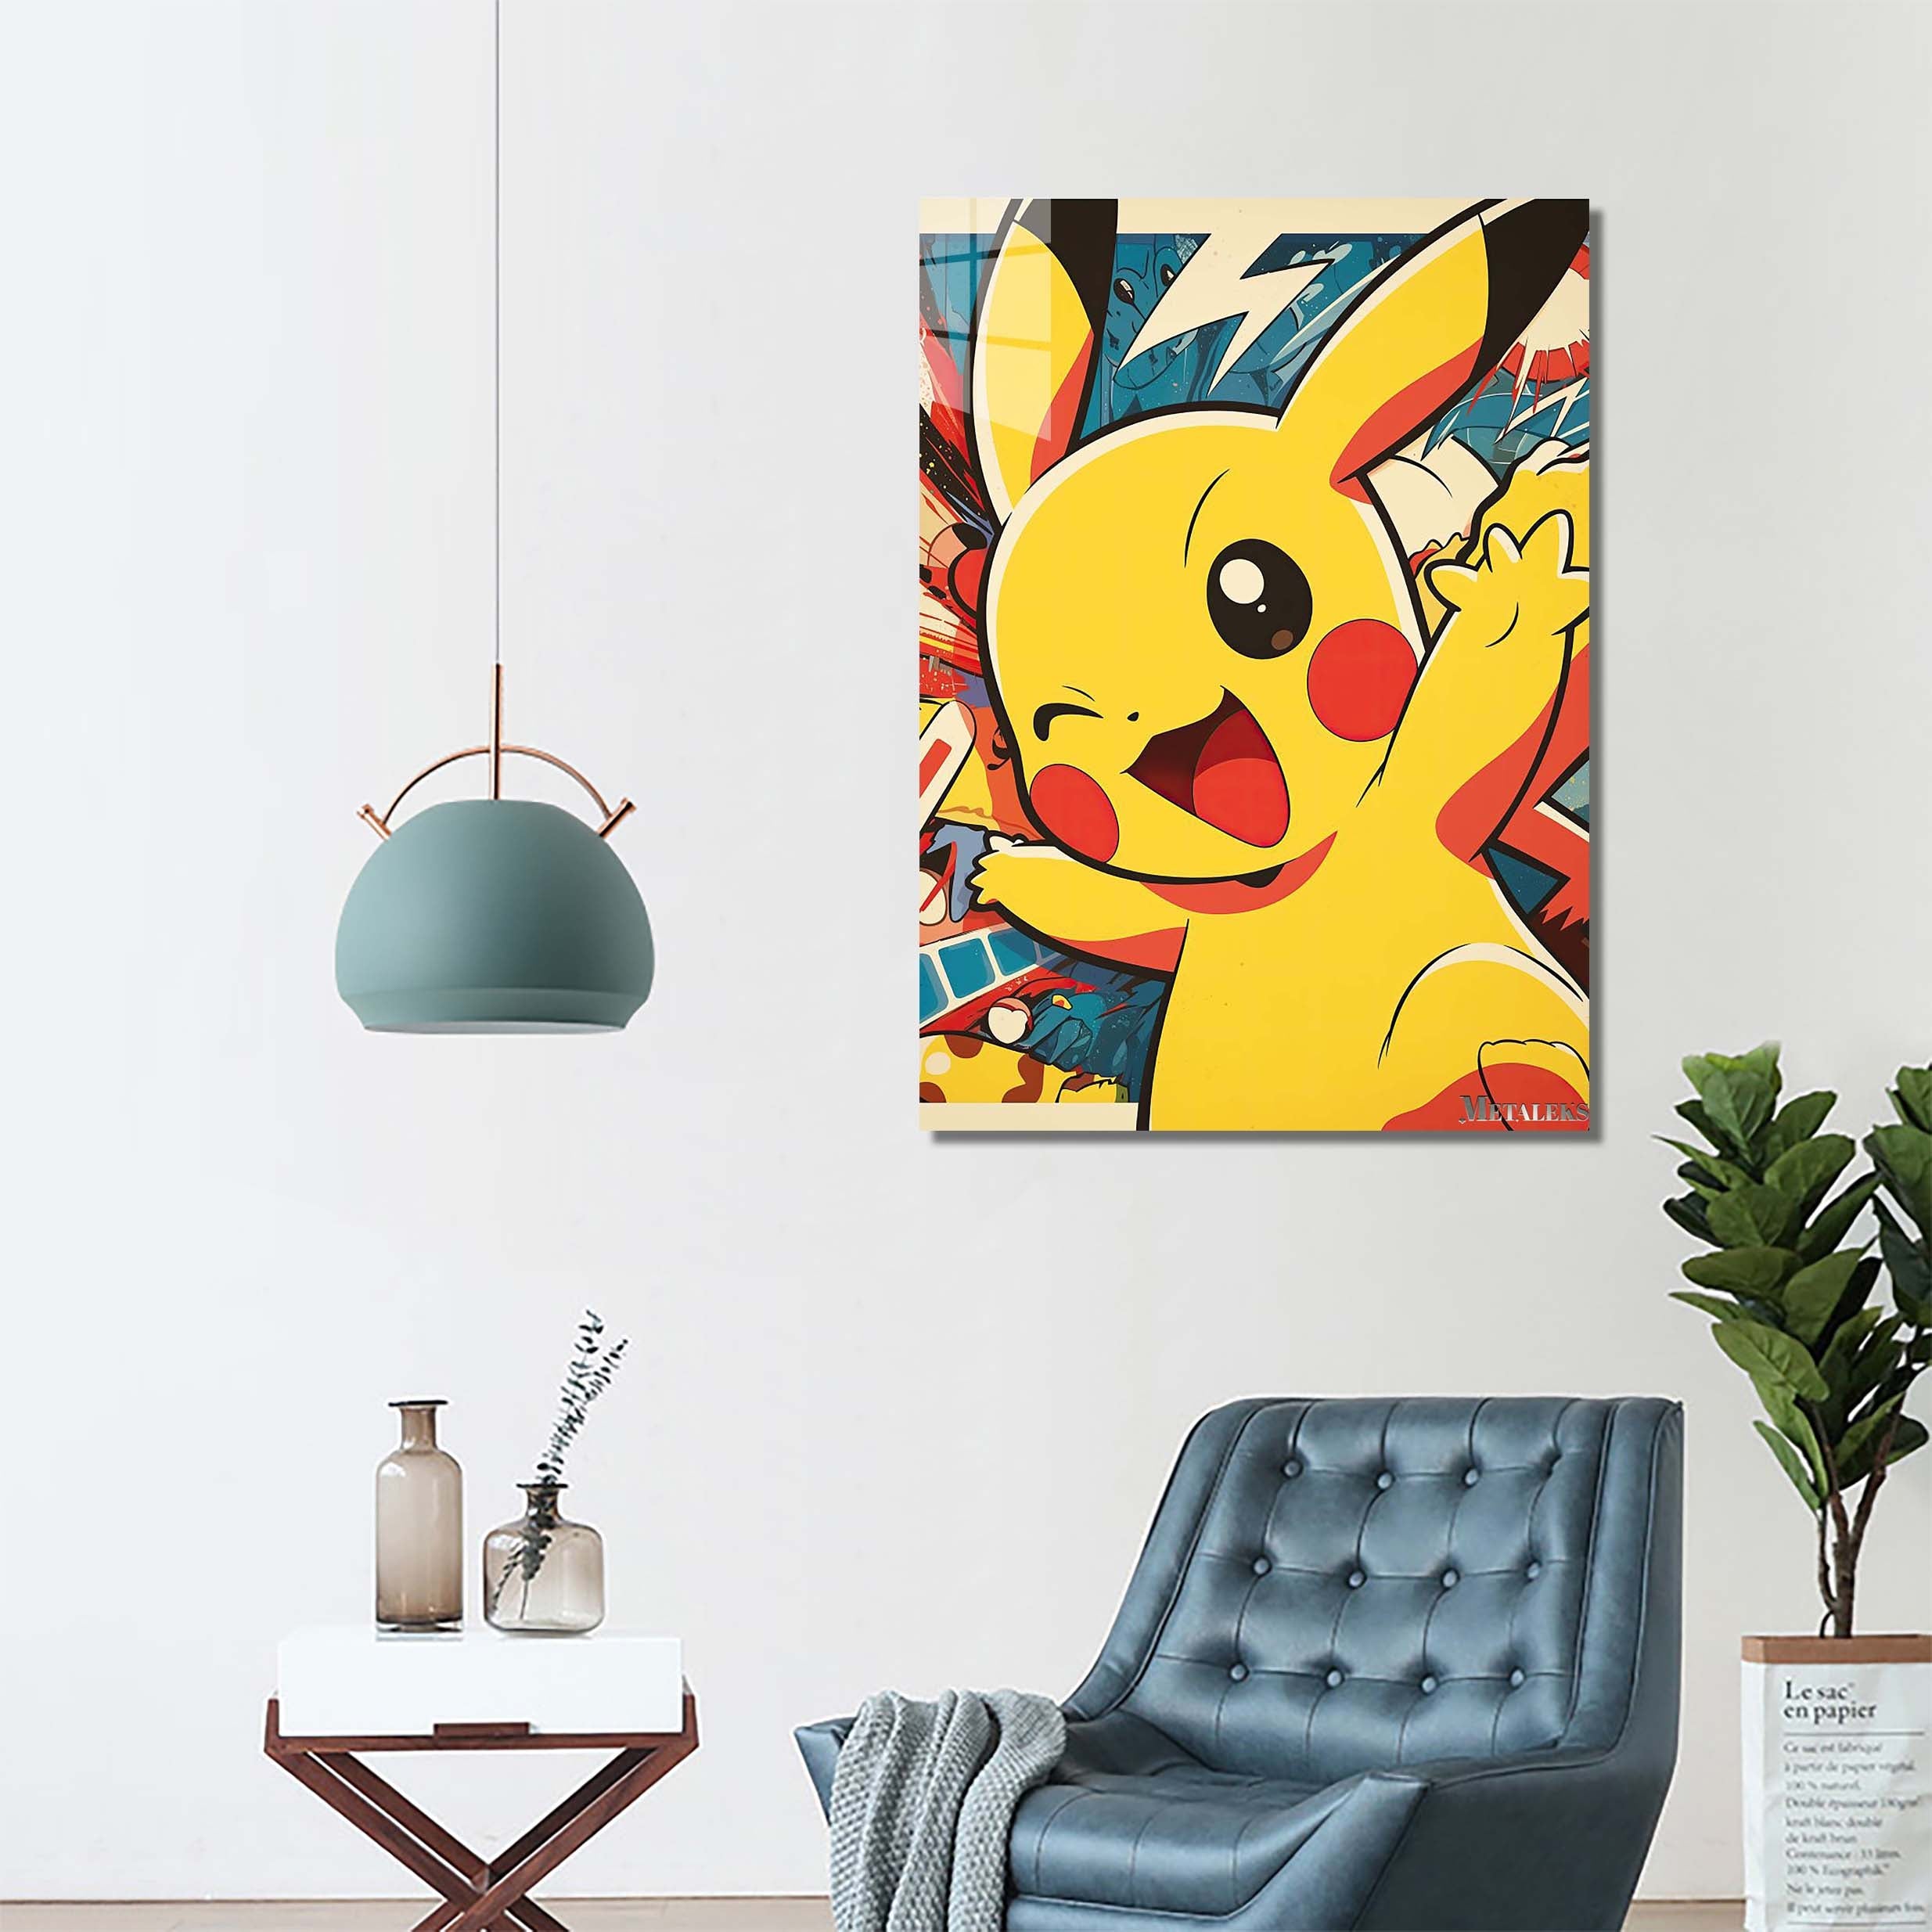 Pop Pika 1-designed by @Silentheal